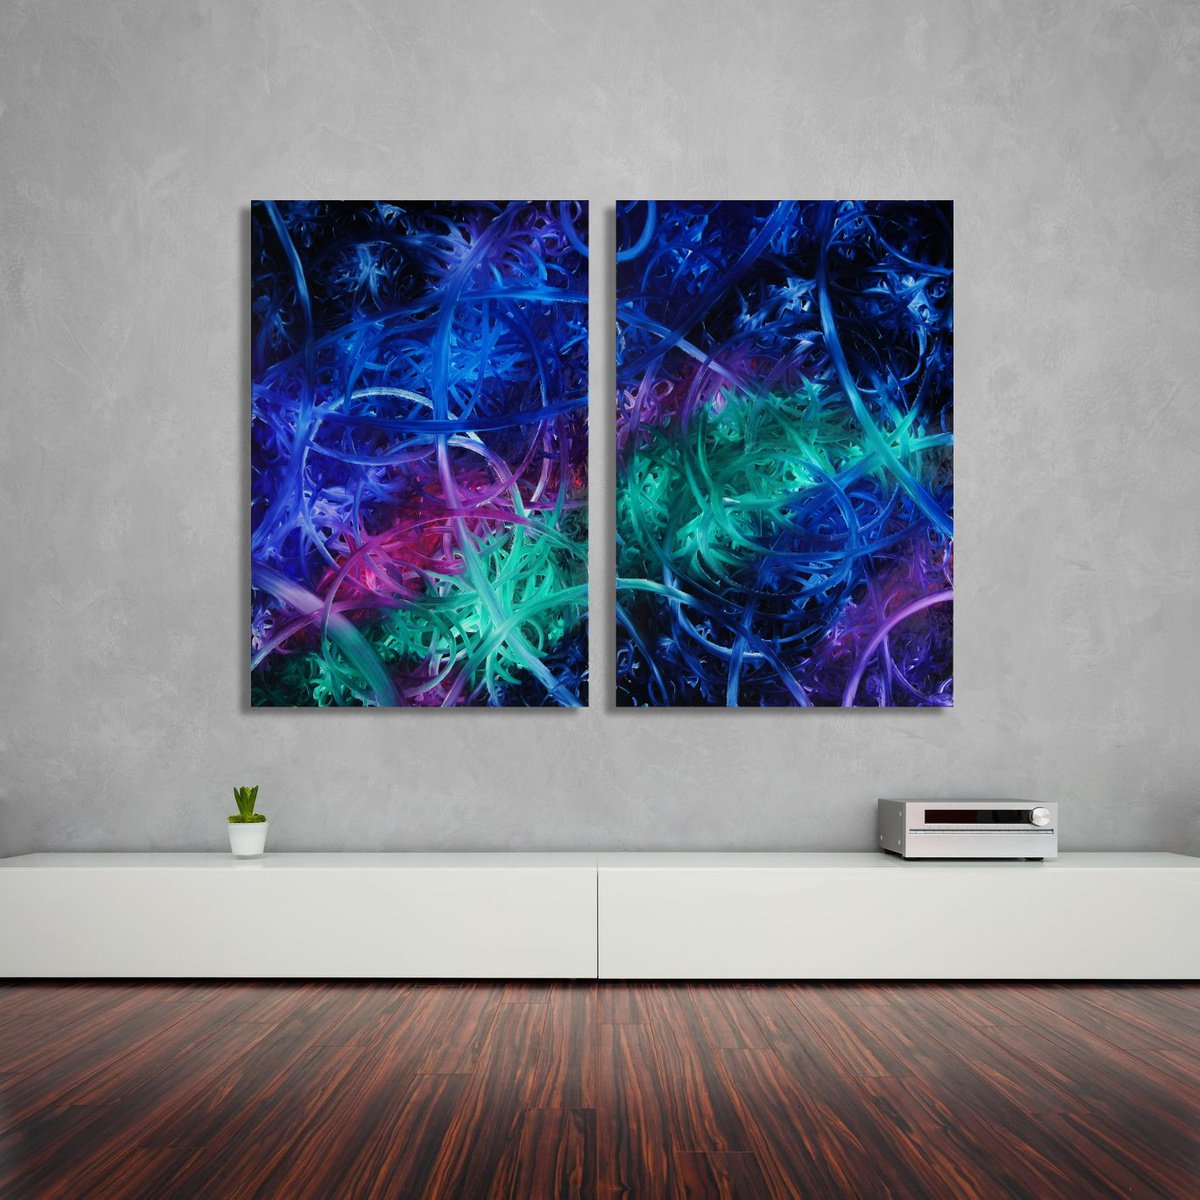 Left Spin & Right Spin (Diptych) XXXL (165 x 120 cm) (66 x 48 inches) by Ansgar Dressler